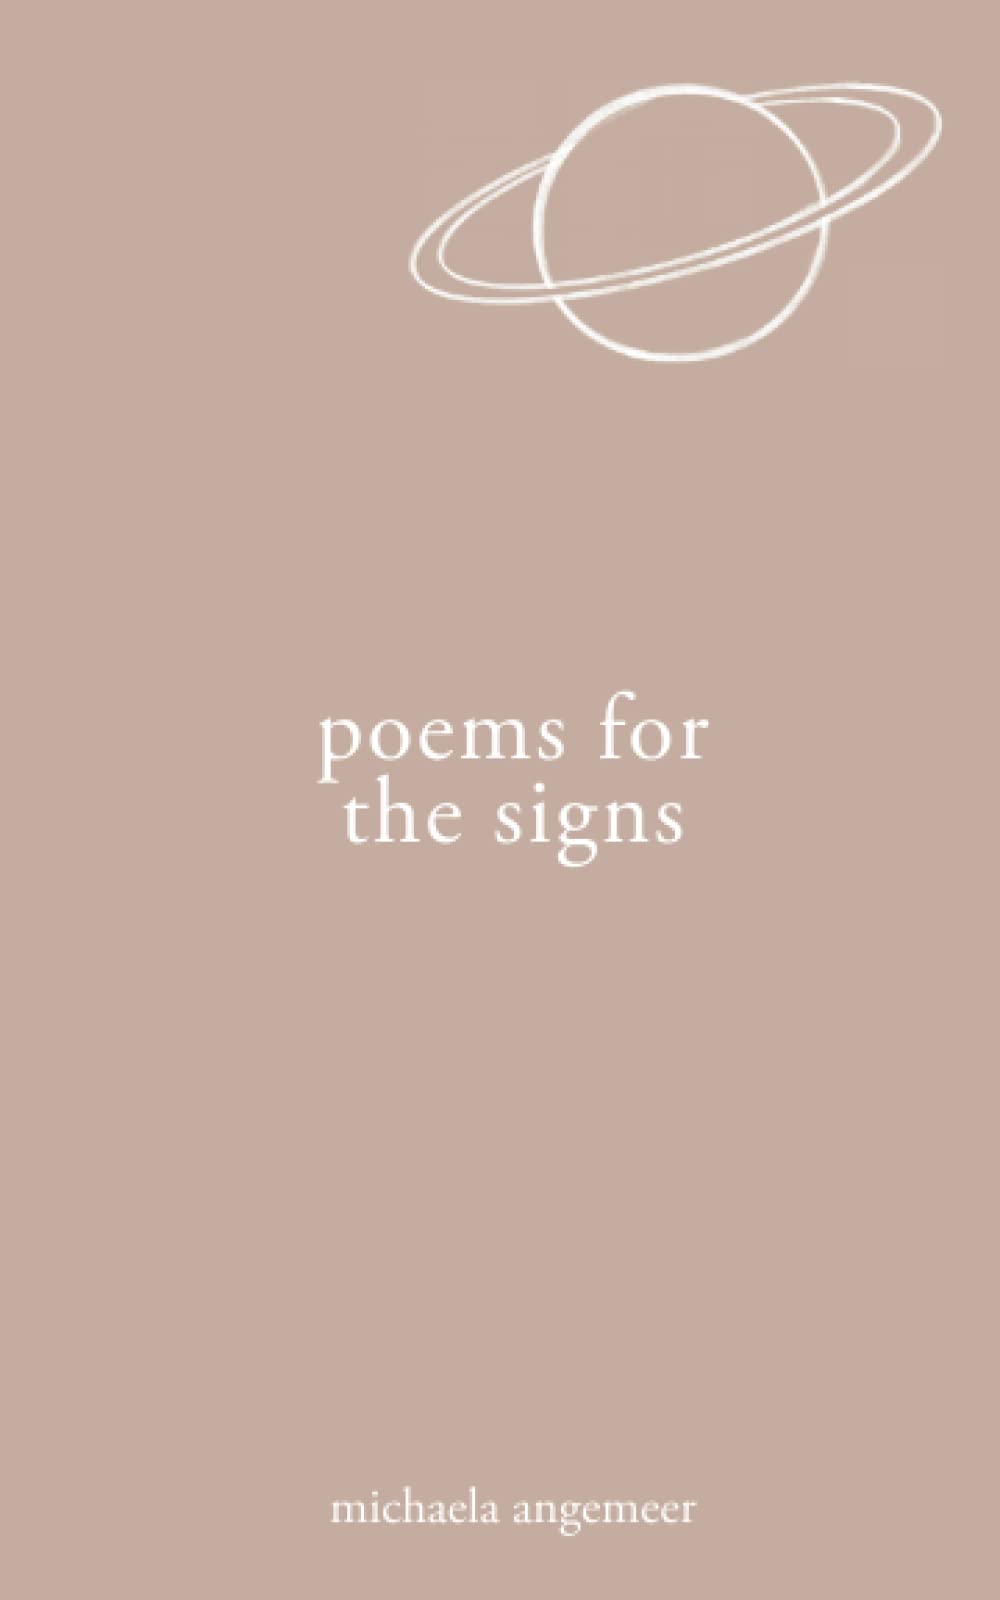 Book Poems for the Signs Michaela Angemeer